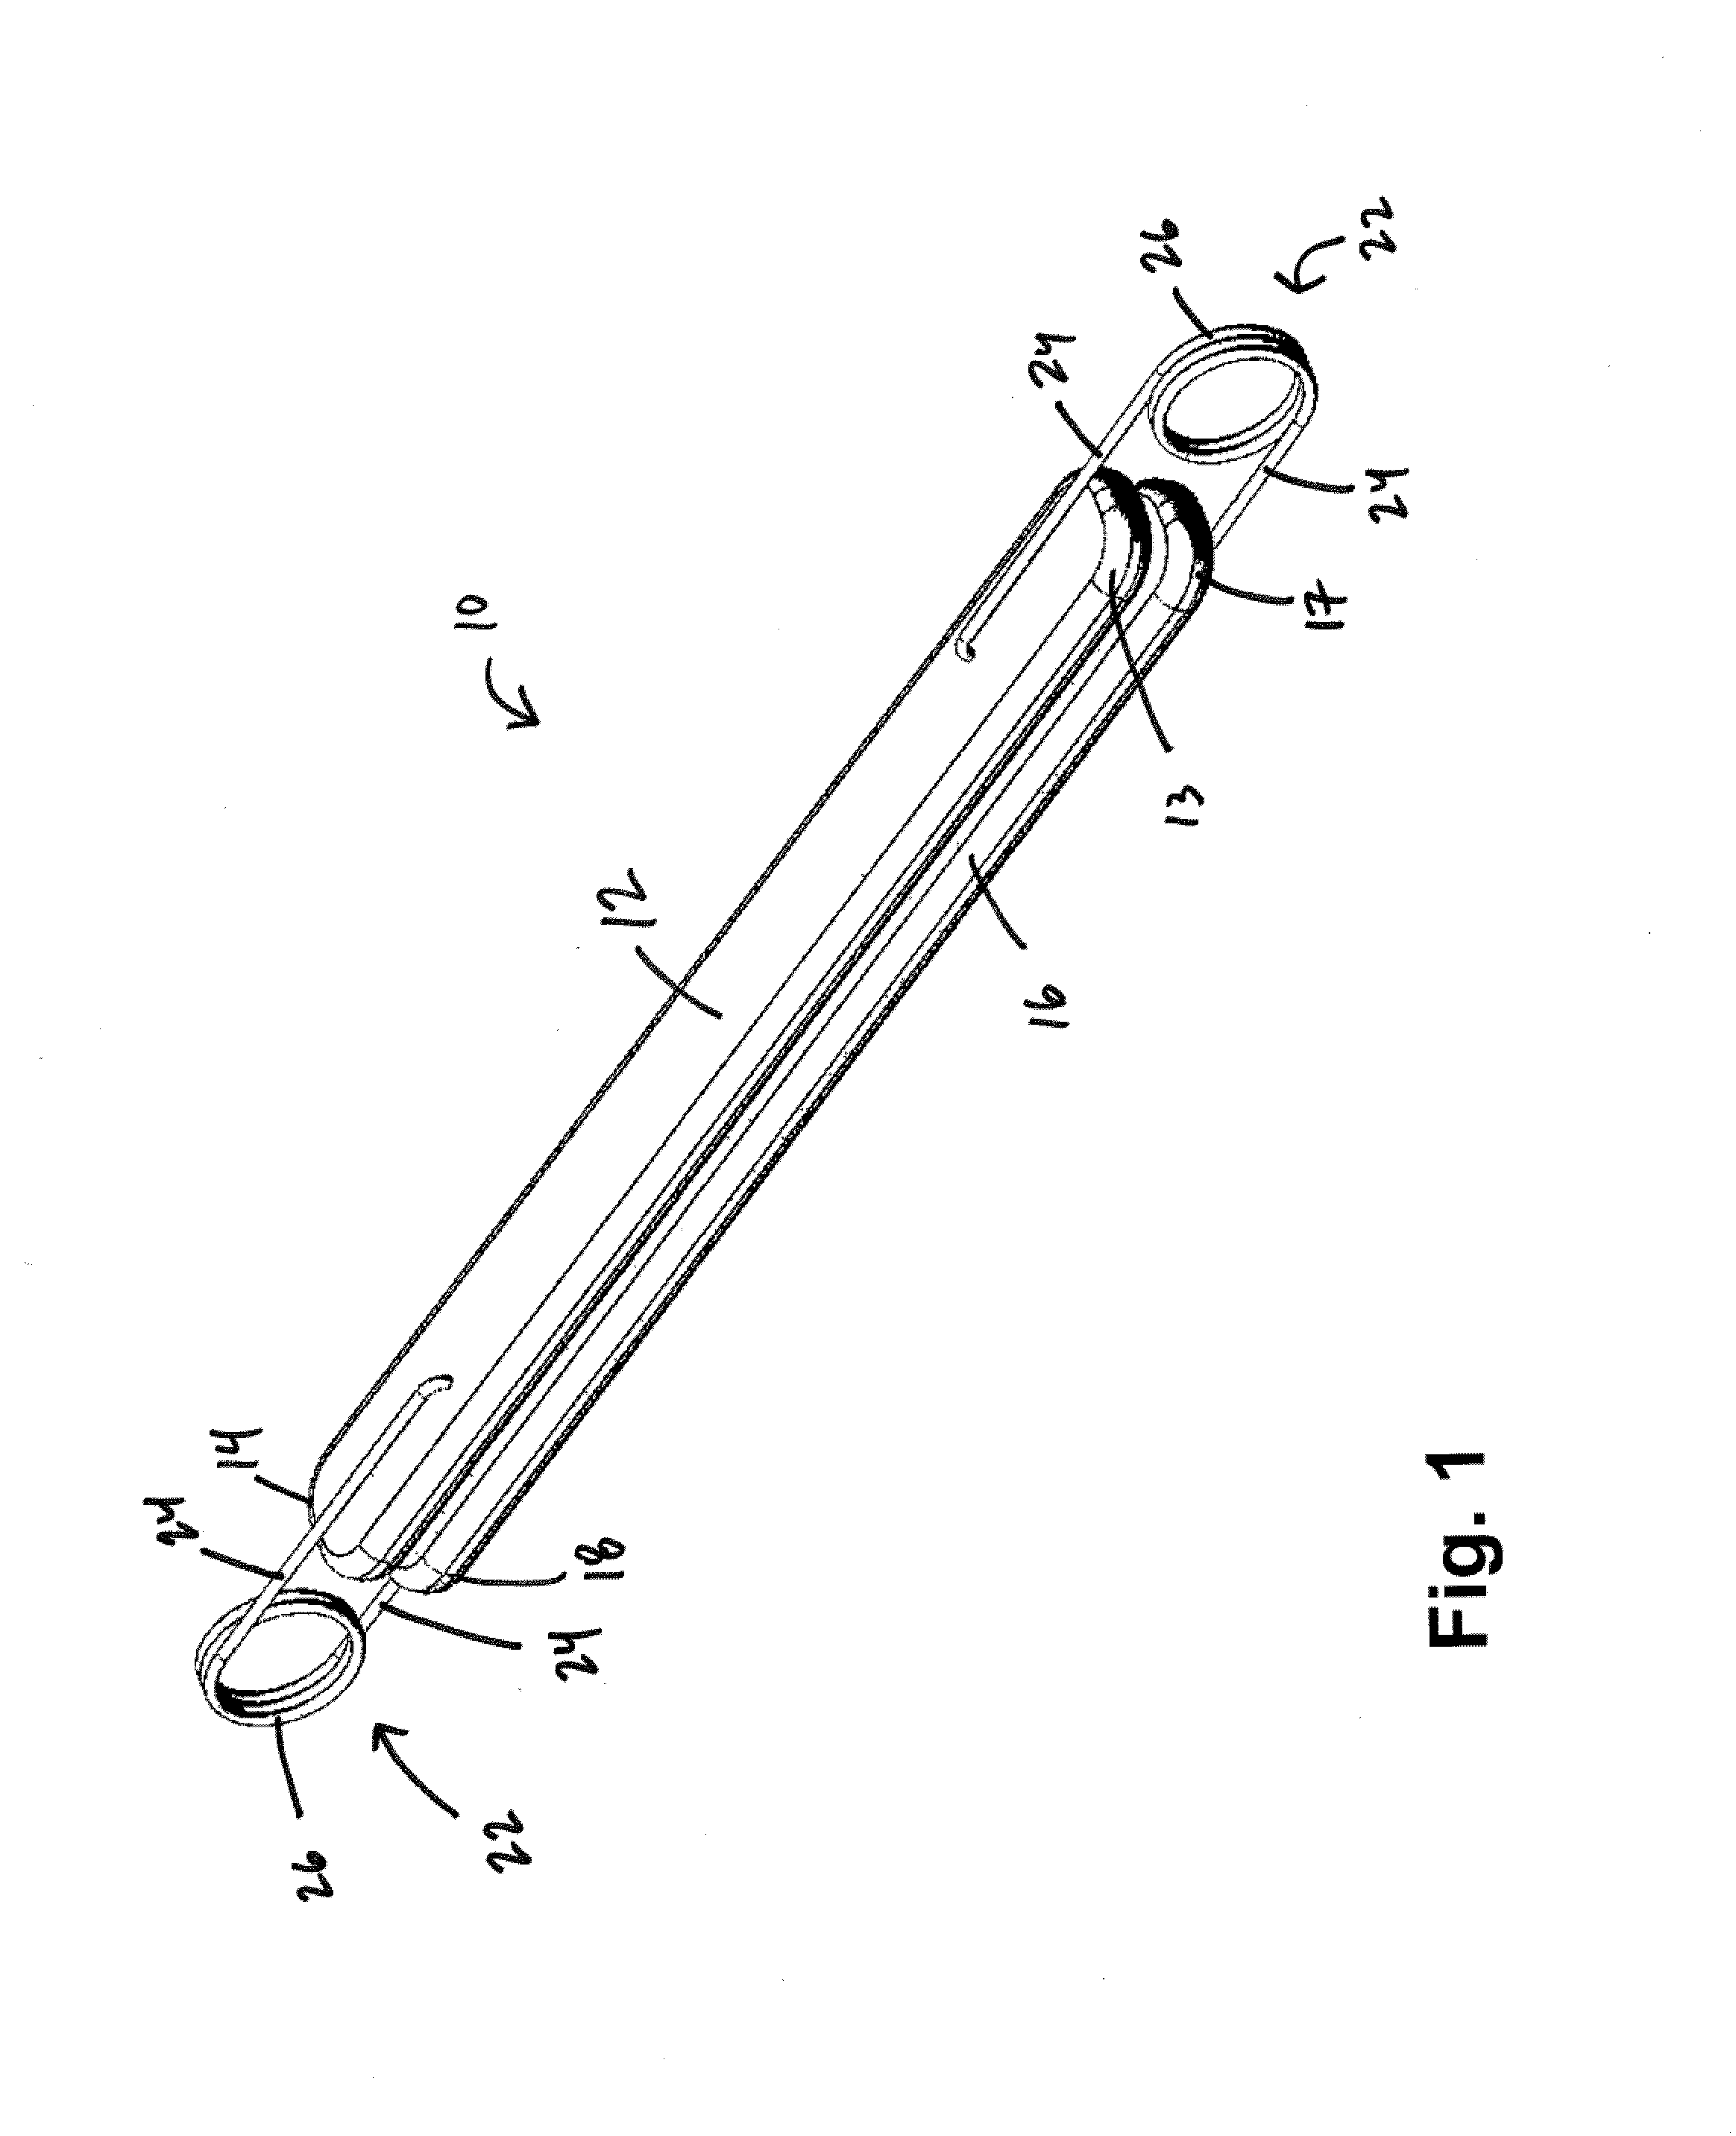 Devices, systems and methods for tissue restoration